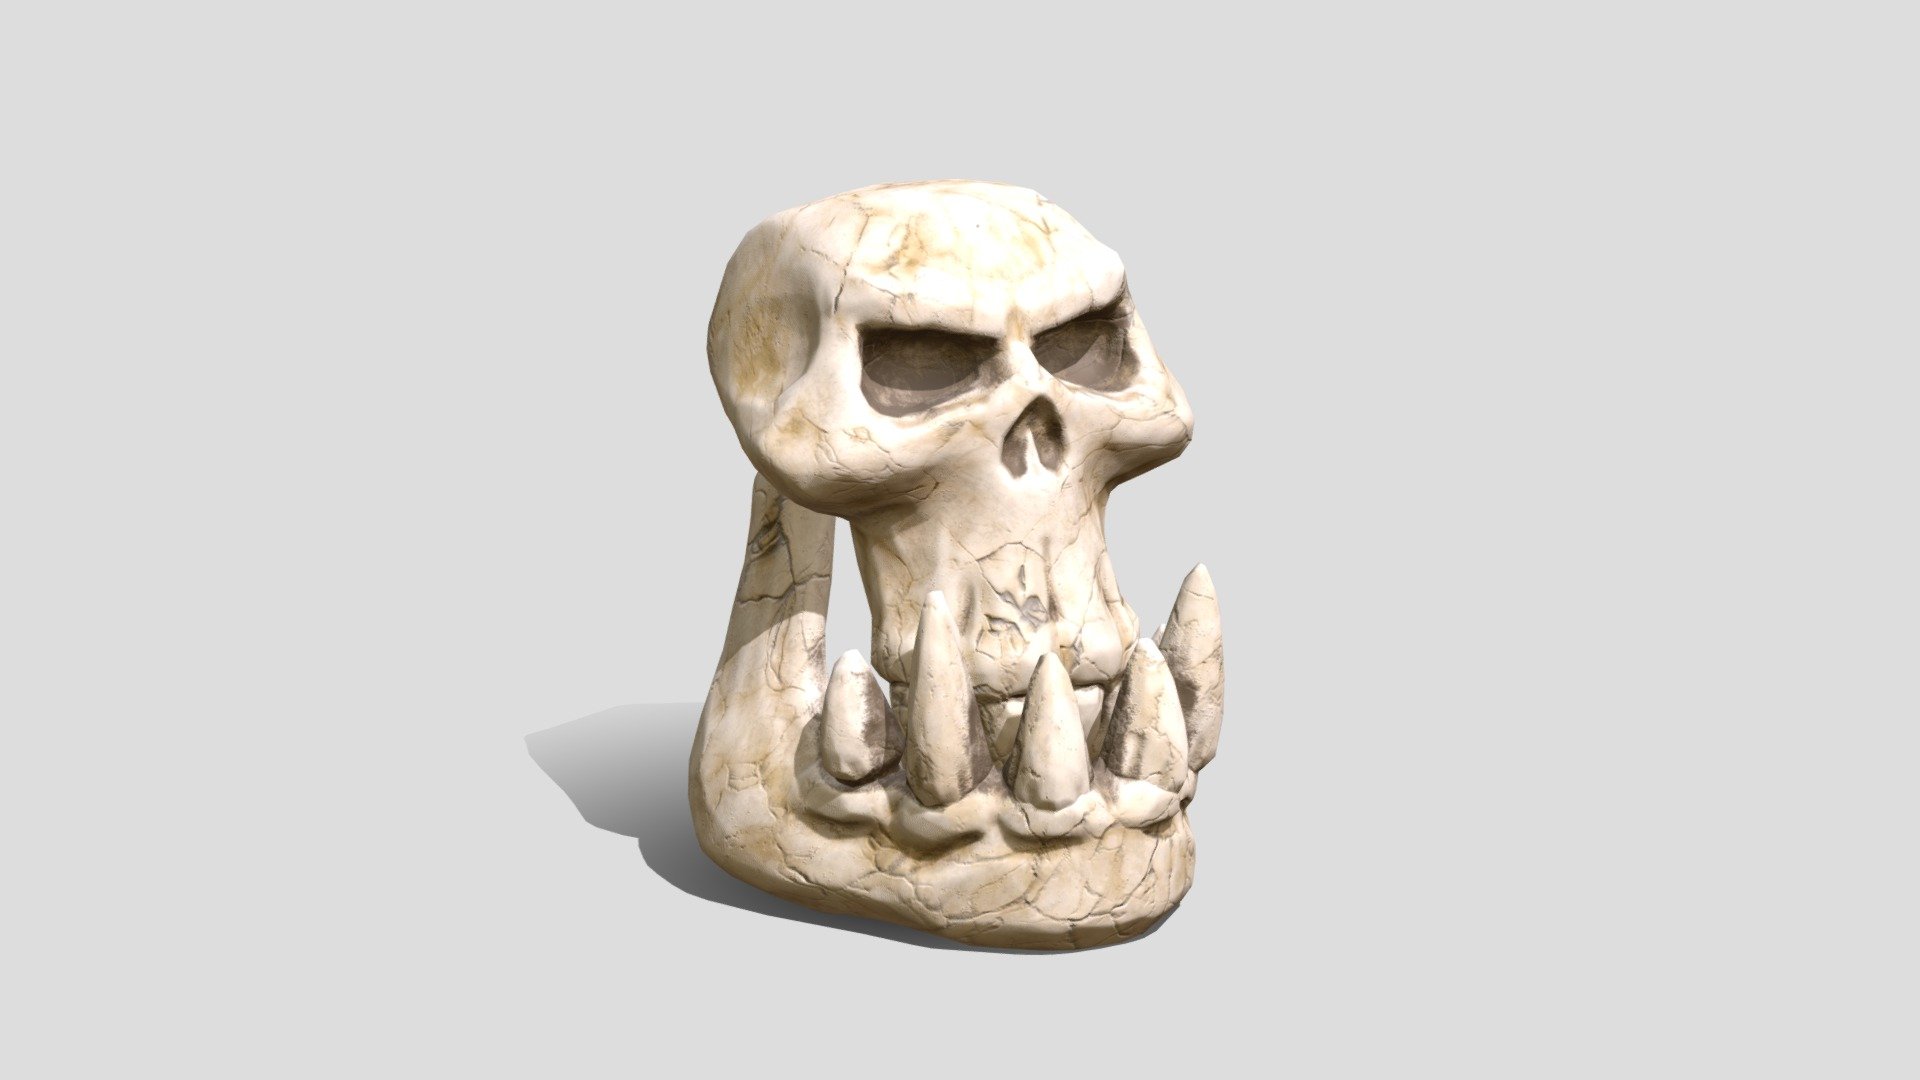 Big Skull from Big Ork

Purchase the 3D printable file here:
https://cults3d.com/en/3d-model/game/pork-skull

Check out you YouTube Channel for more creative works of mine: www.youtube.com/c/VidovicArts101 - Skull of a 40k Warhammer Waaagh Boss - 3D model by VidovicArts (@oshjavid) 3d model